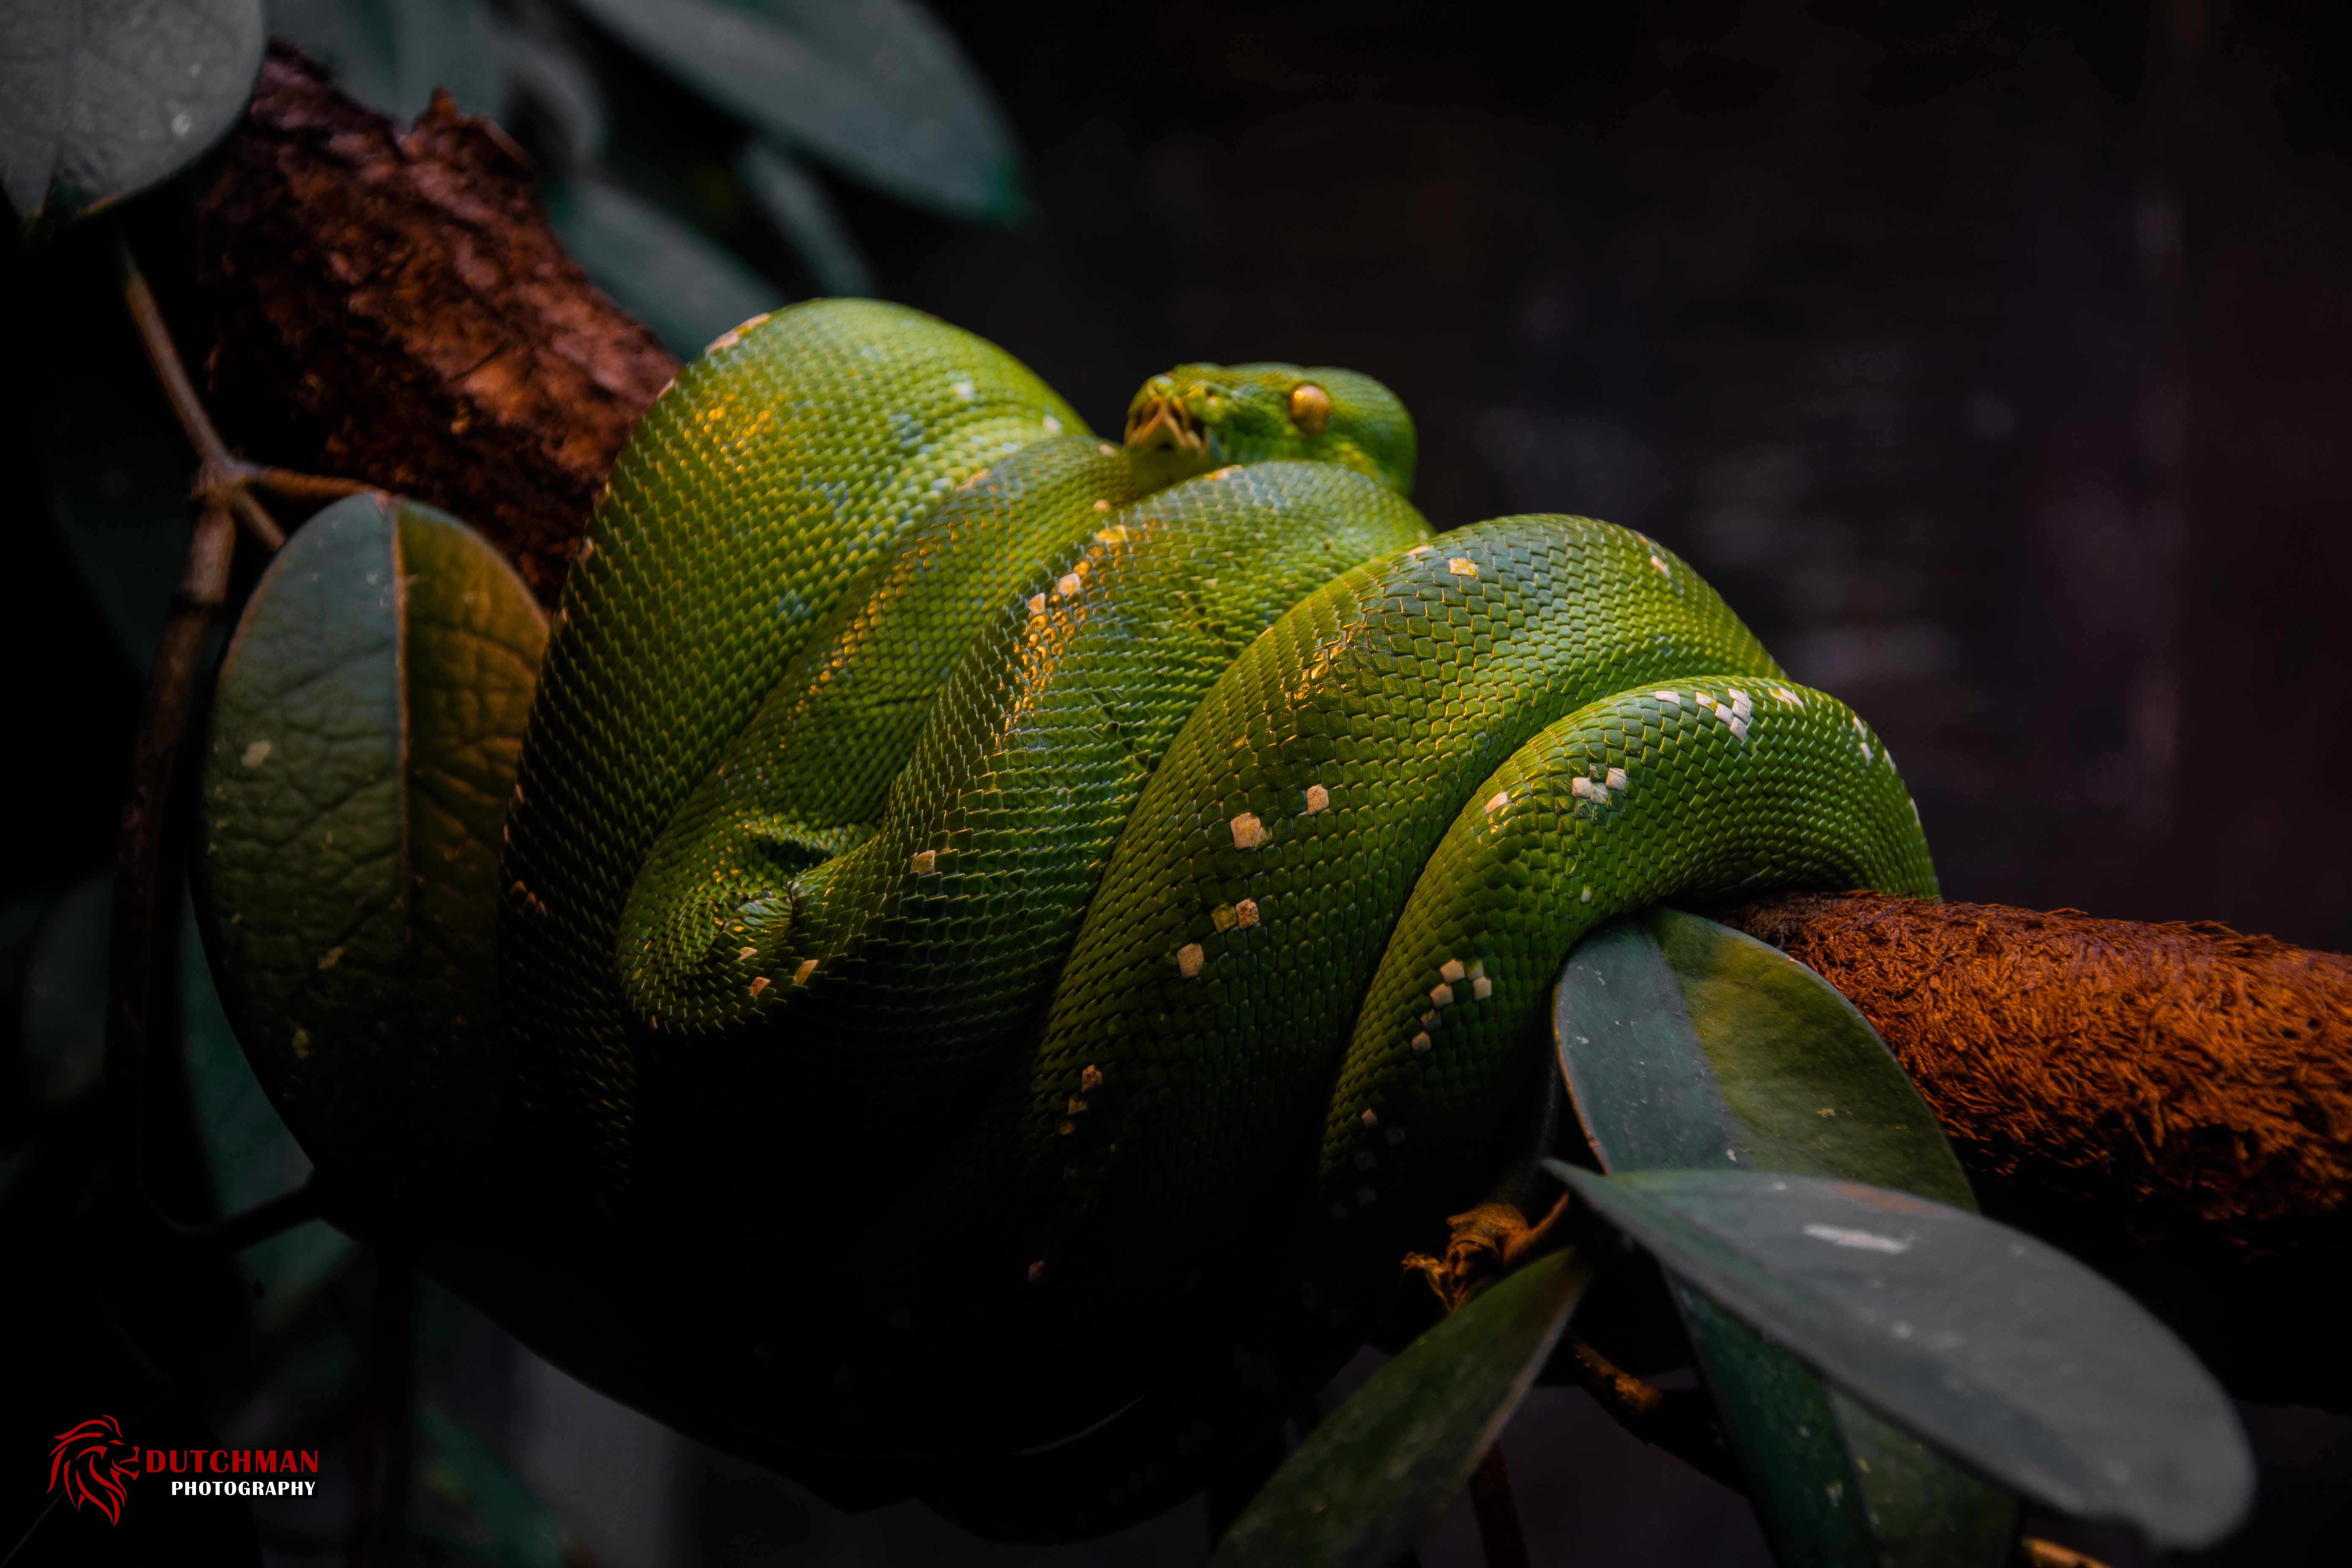 Branch Green Nature Snake 5568x3712